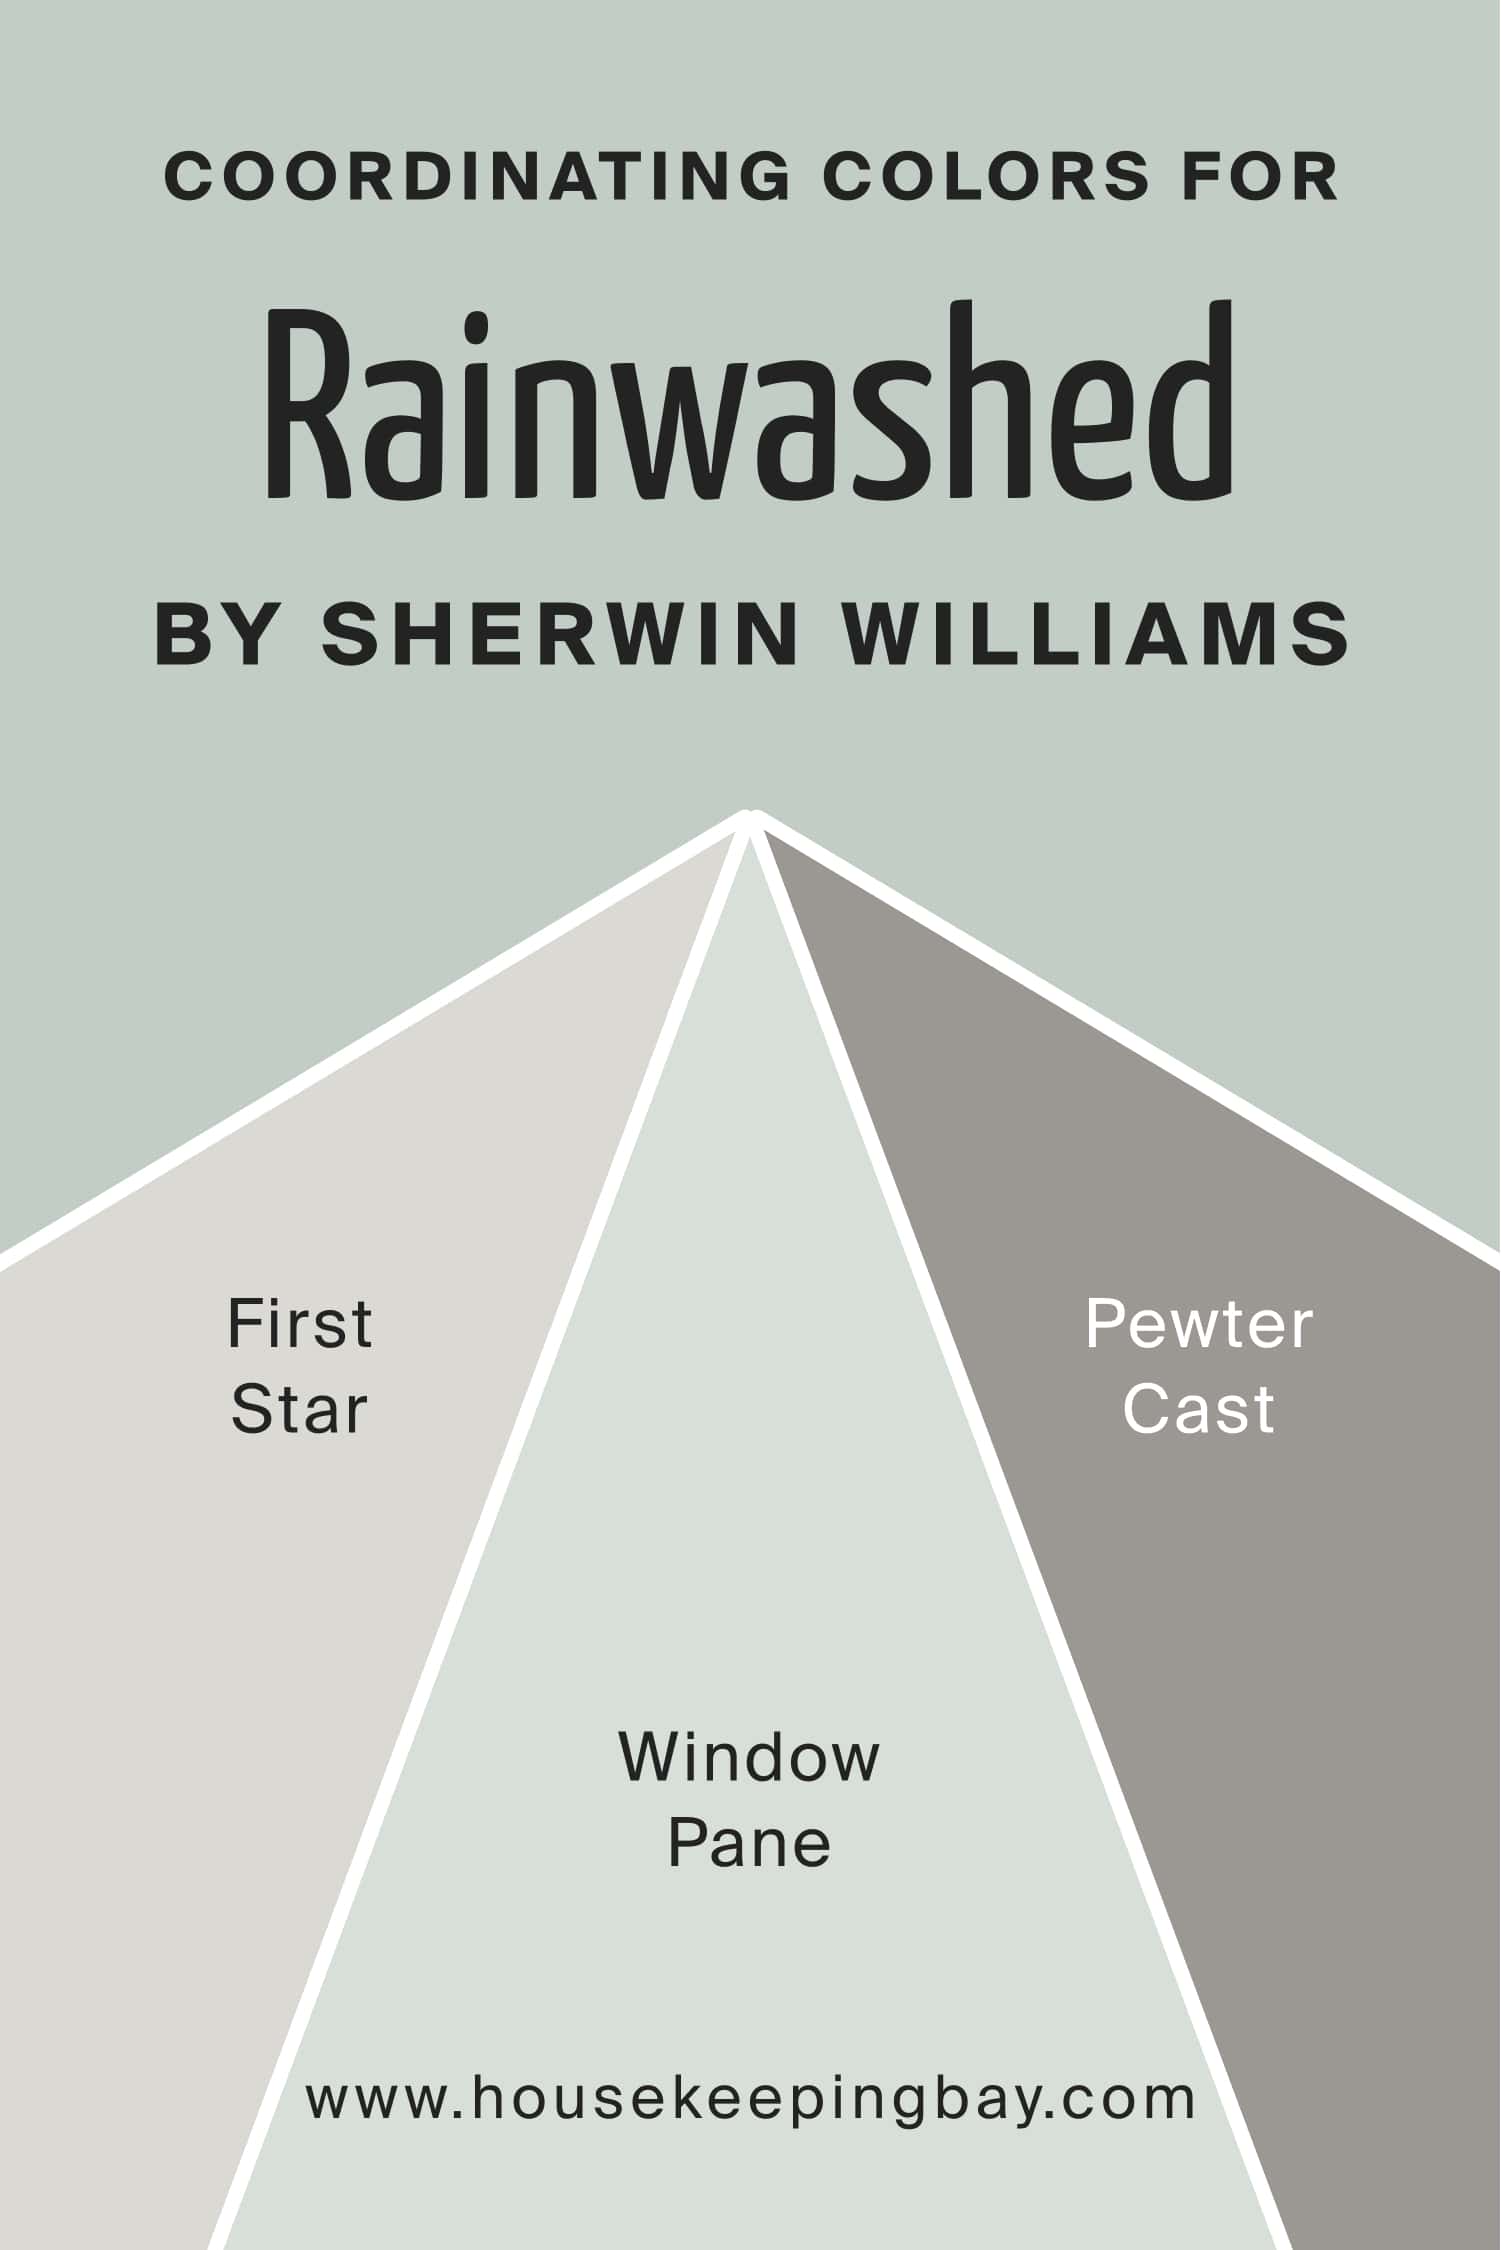 Coordinating Colors for Rainwashed by Sherwin Williams